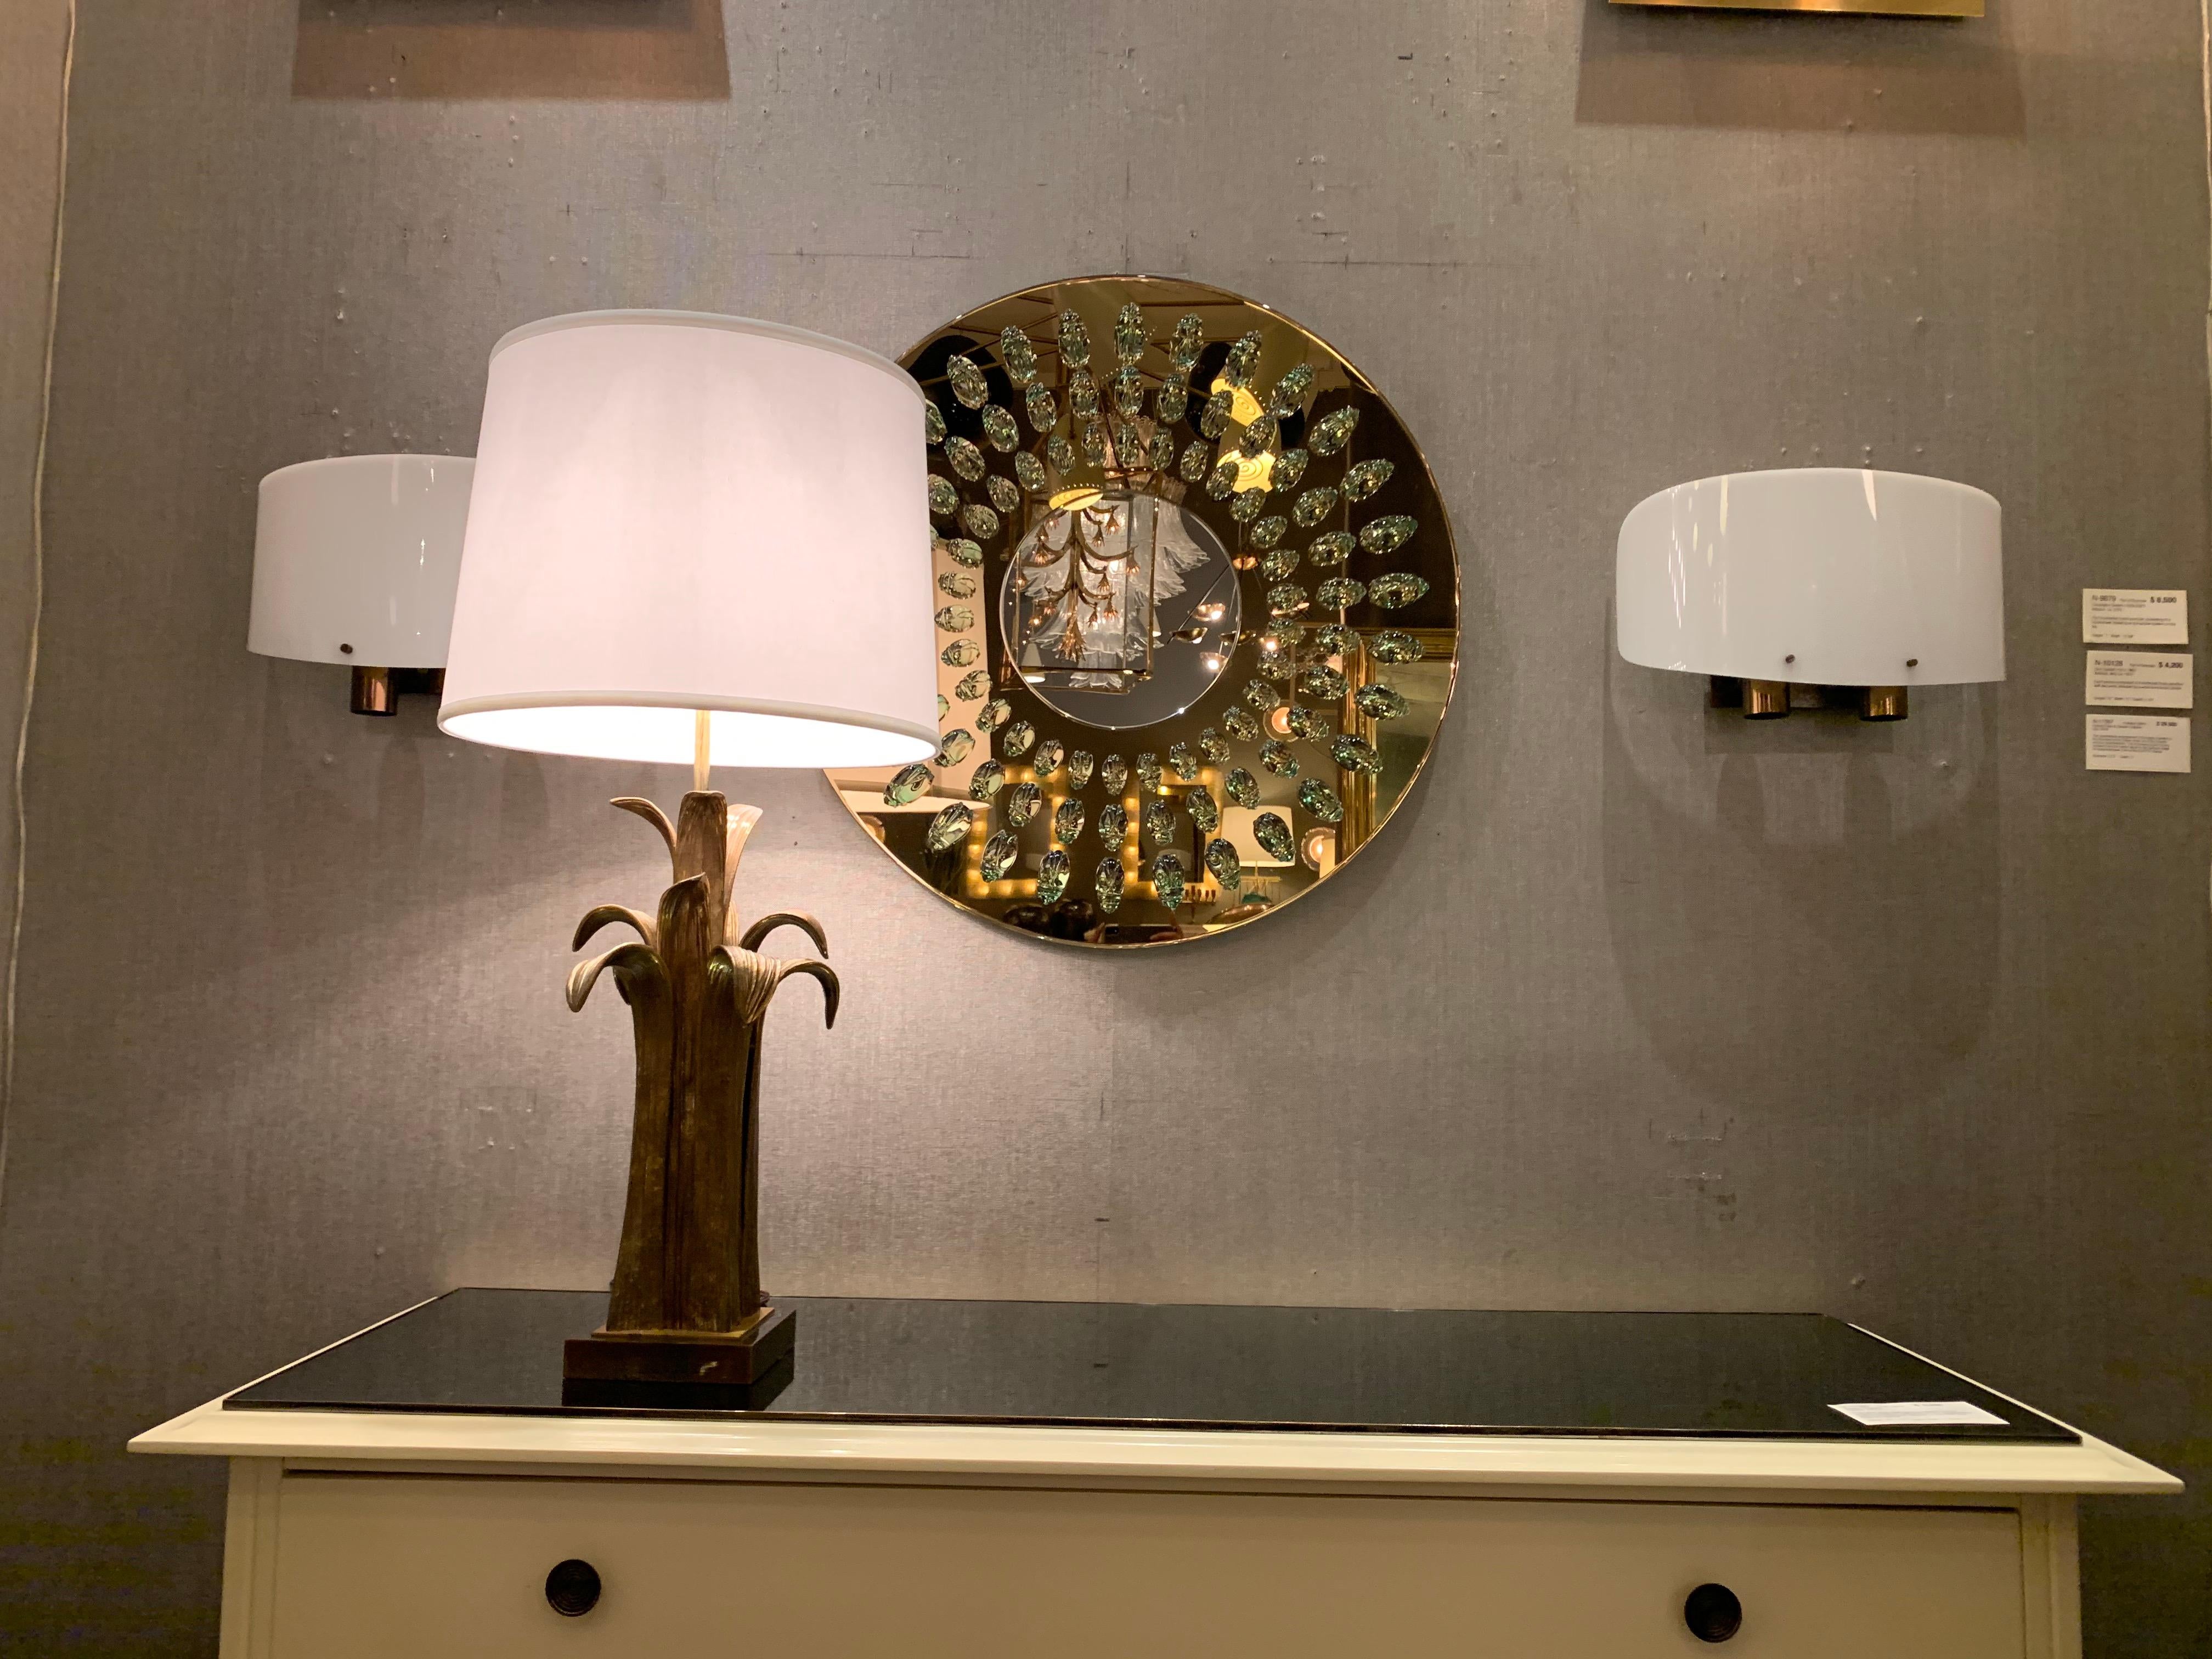 Mid-20th Century Pair of Sconces by Gino Sarfatti, Arteluce, Italy, circa 1956 For Sale